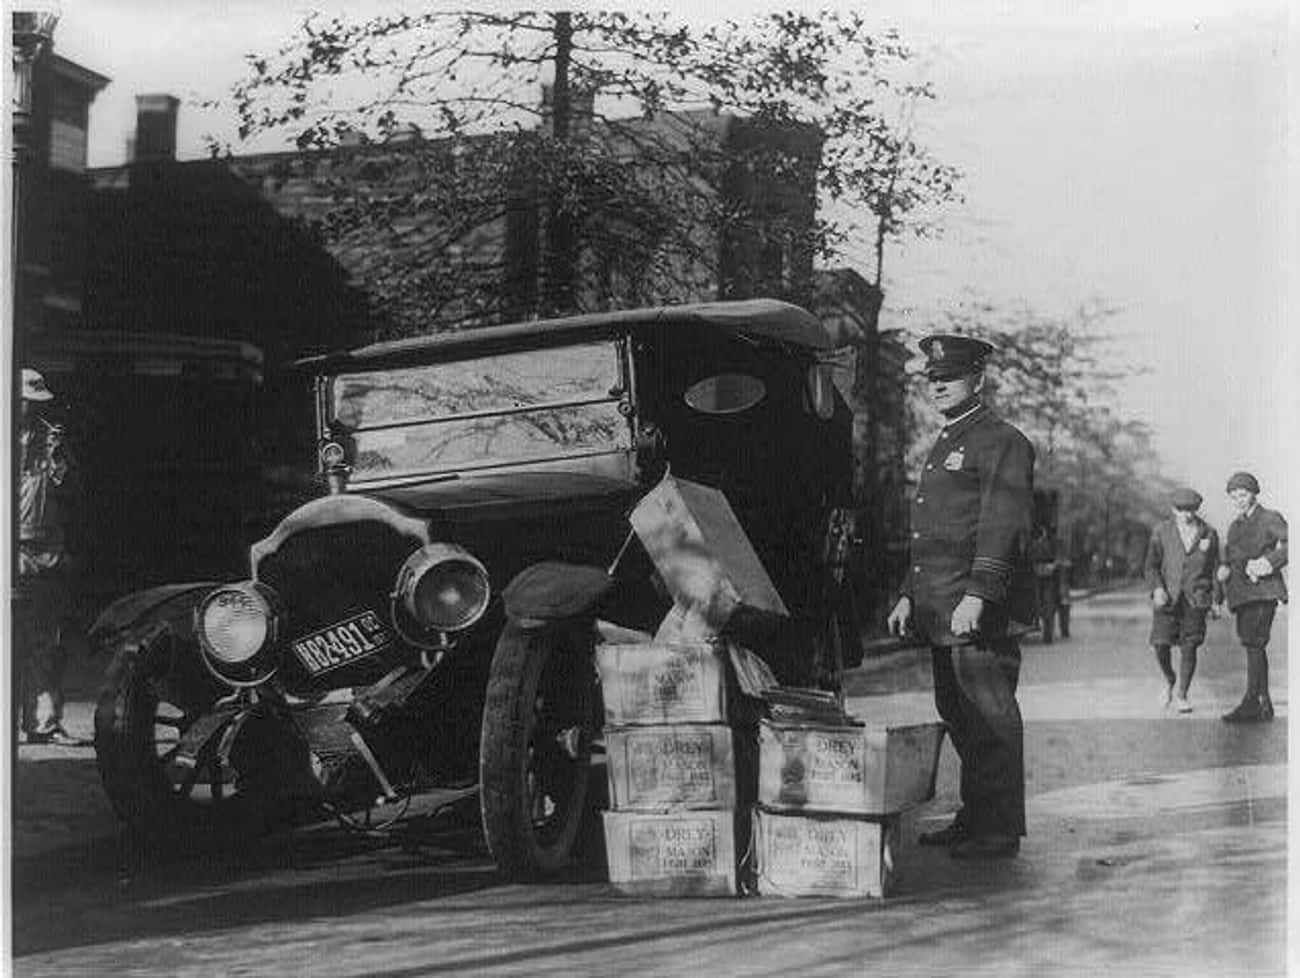 Bootleggers And Rumrunners Were Essential To Getting The Product Out To Anxious Consumers